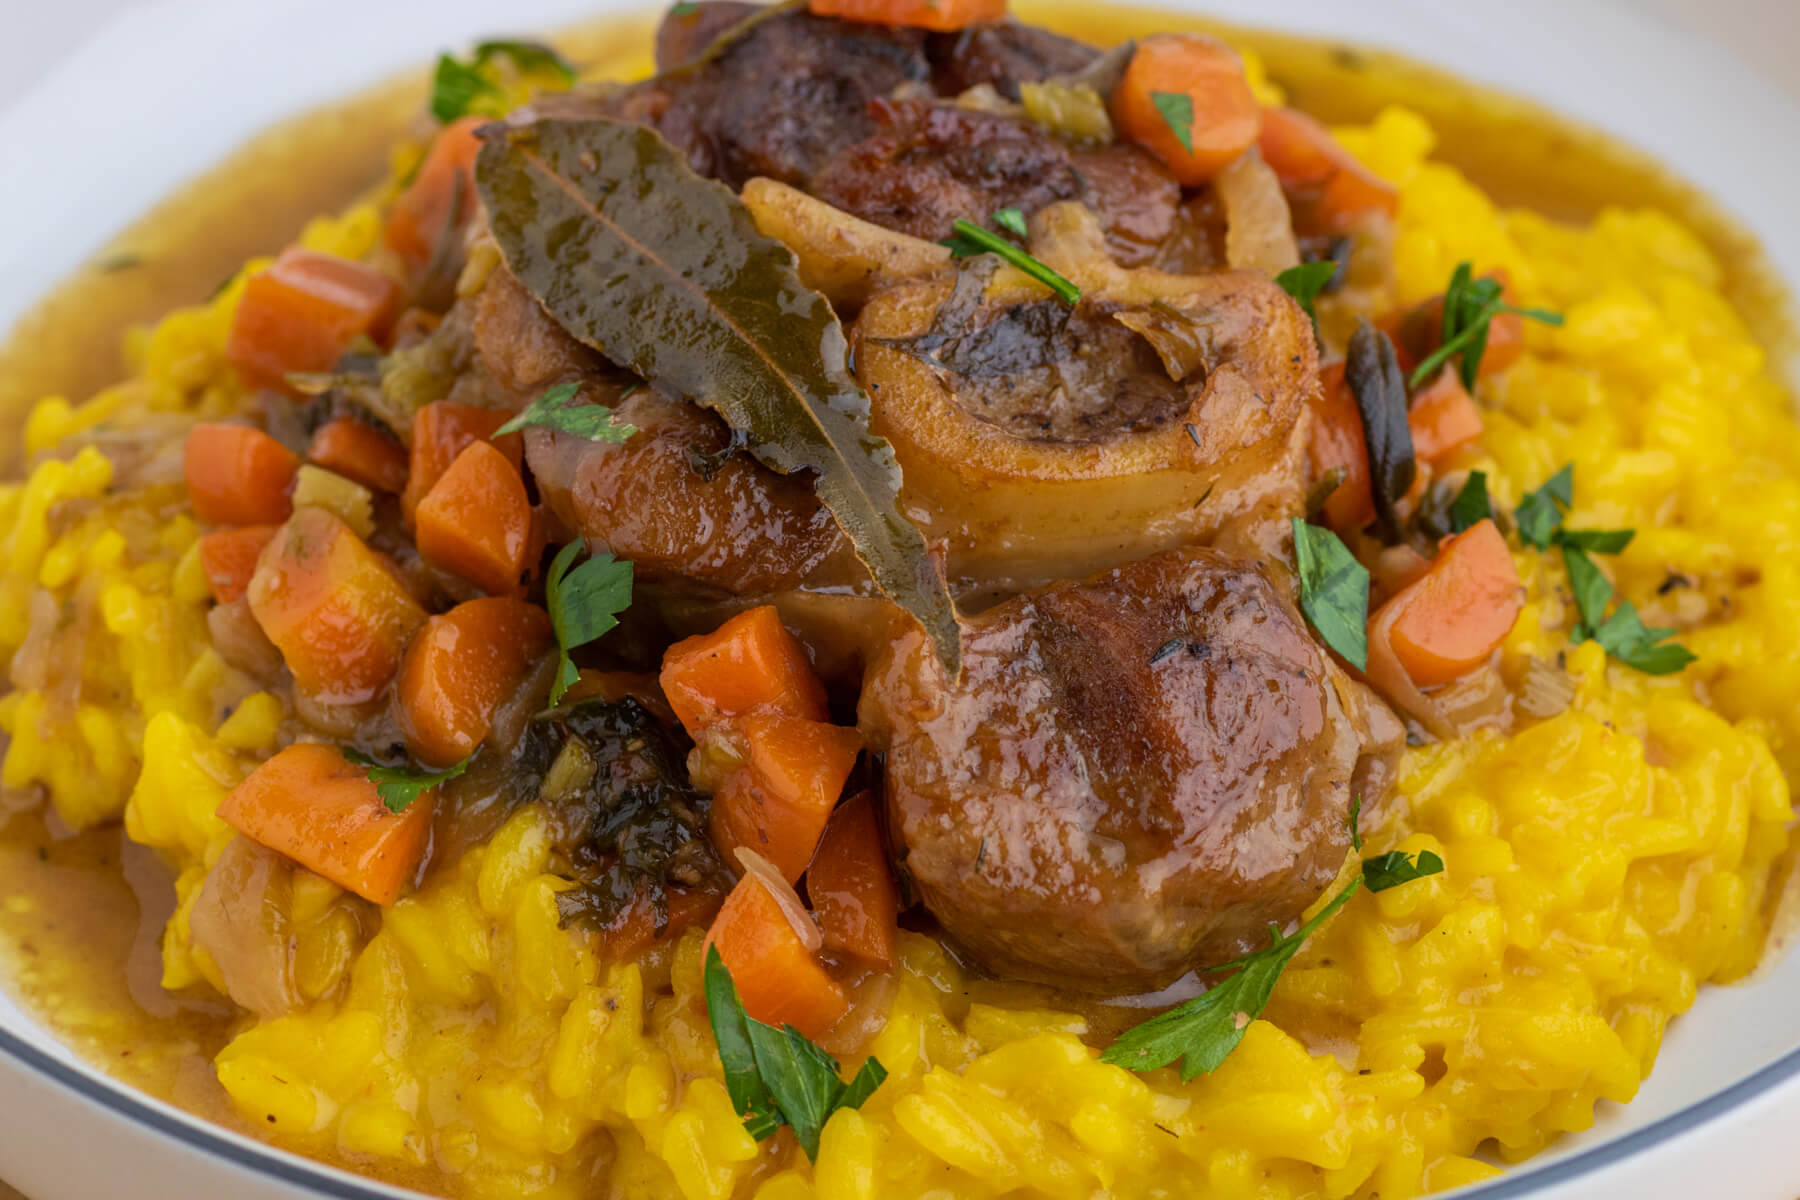 A slow cooked veal Osso Bucco served on top of vibrant yellow bed of saffron risotto Milanese.